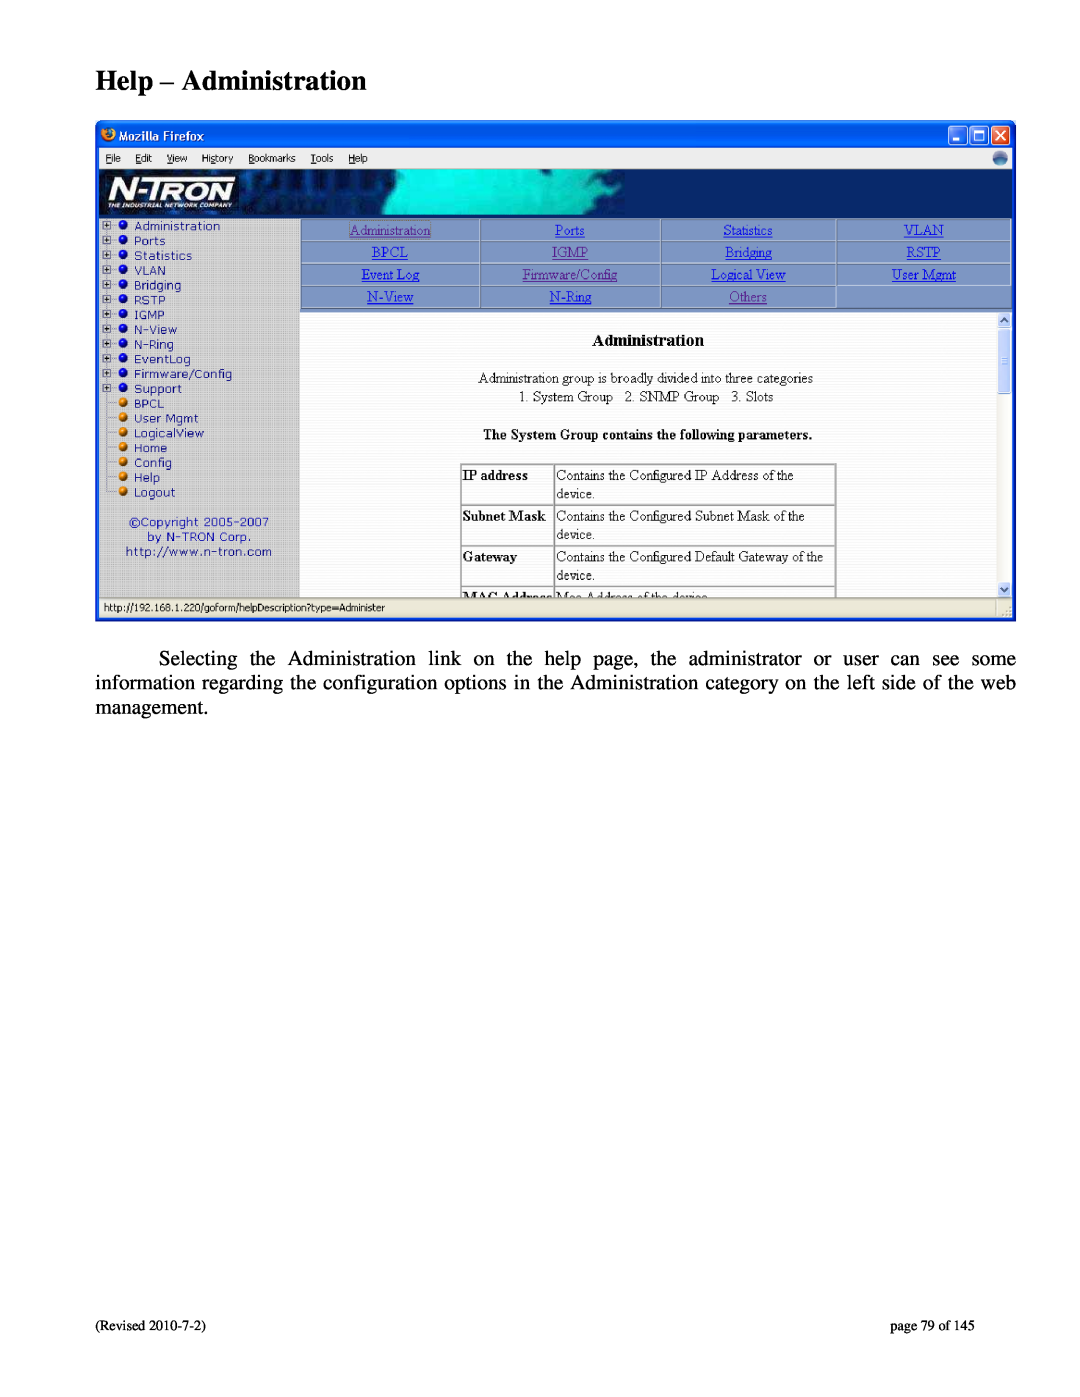 N-Tron 9000 user manual Help - Administration, or user can see some the left side of the web 